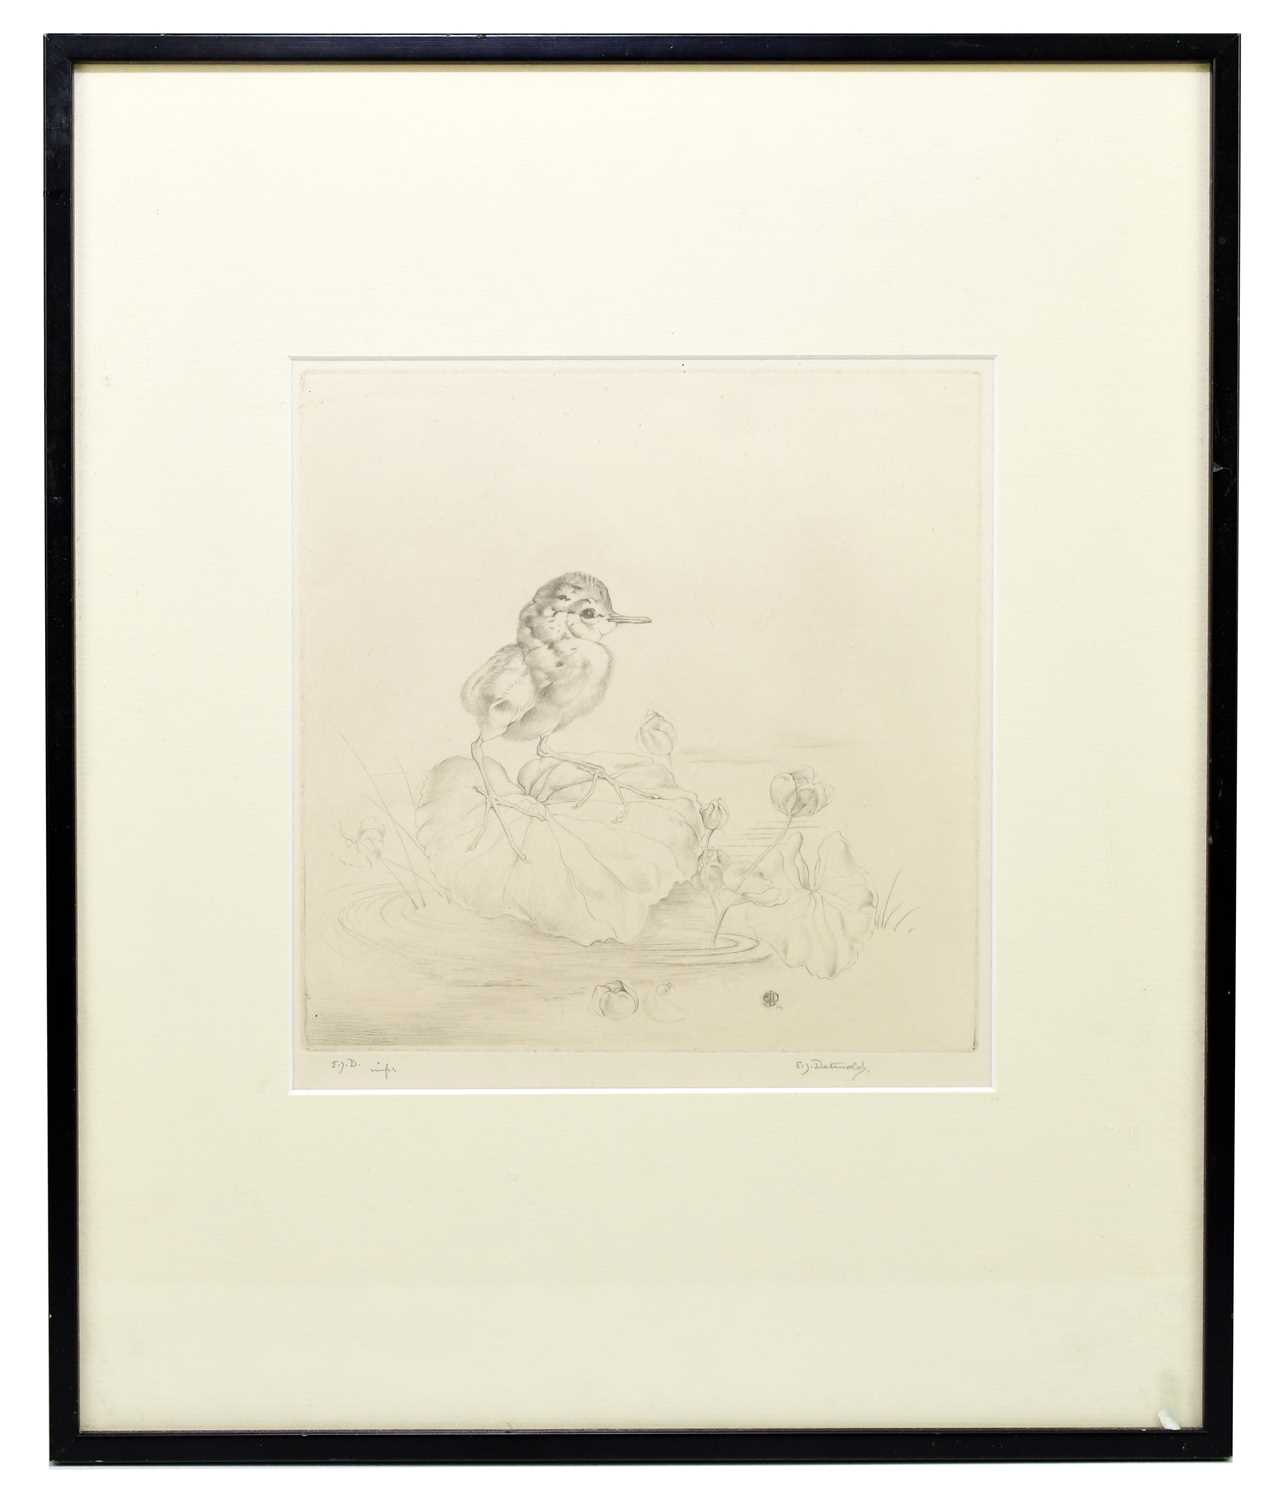 EDWARD JULIUS DETMOLD (1883-1957); etching, Lilytrotter, signed and initialled in pencil, 24.5 x